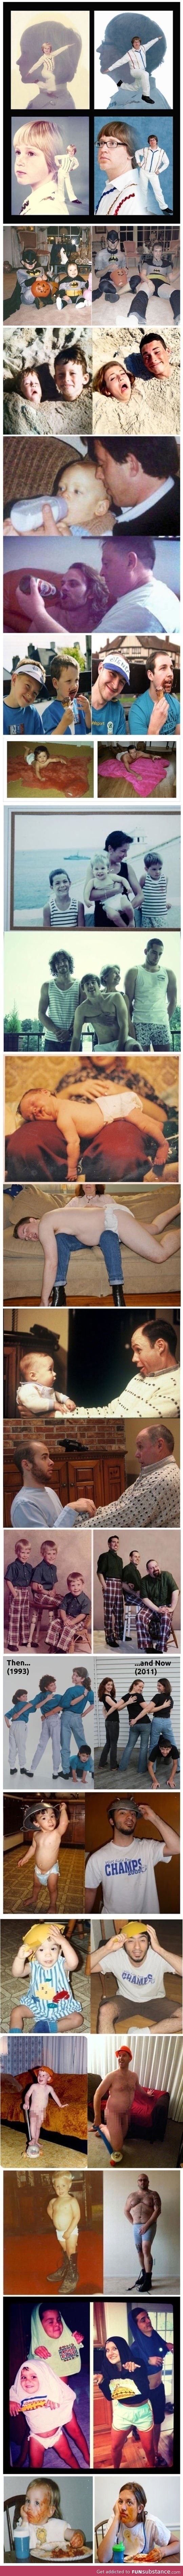 Photos recreated years later